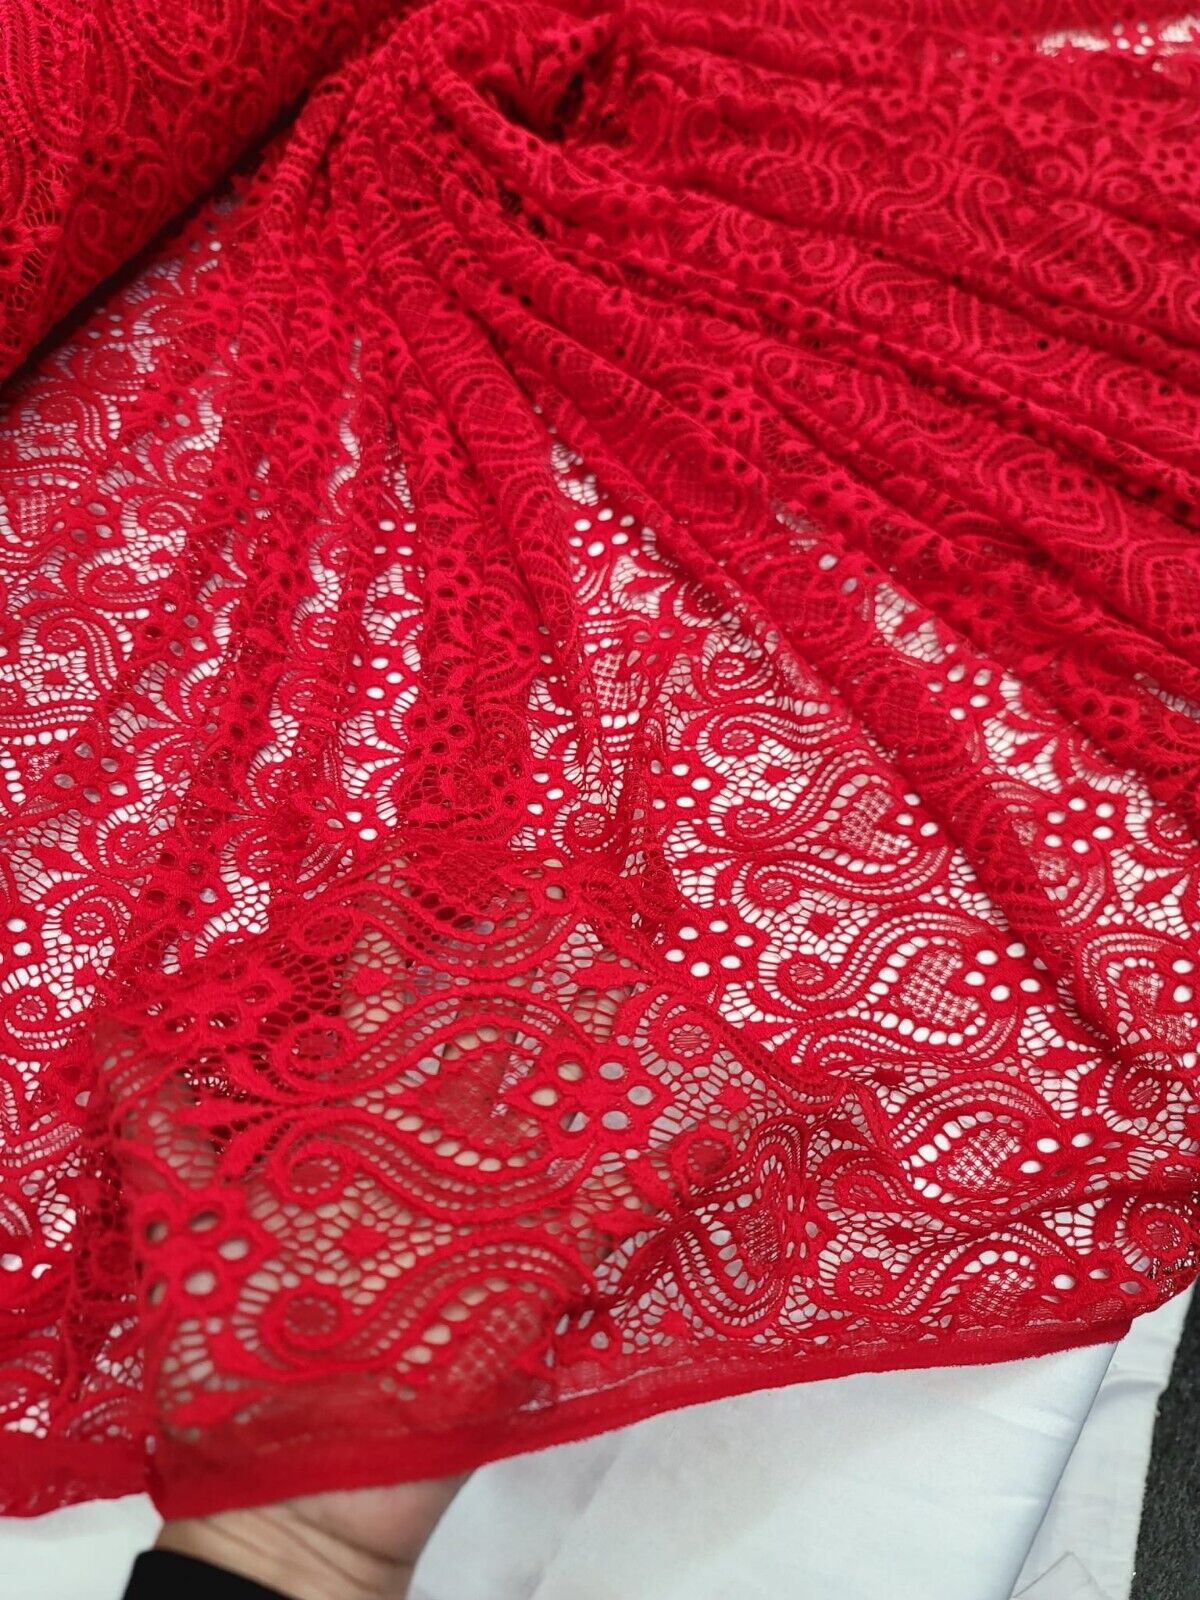 Red Mesh Lace Fabric - Bridal Decoration - Sold by the Yard - Wedding, Prom Dress, Damask